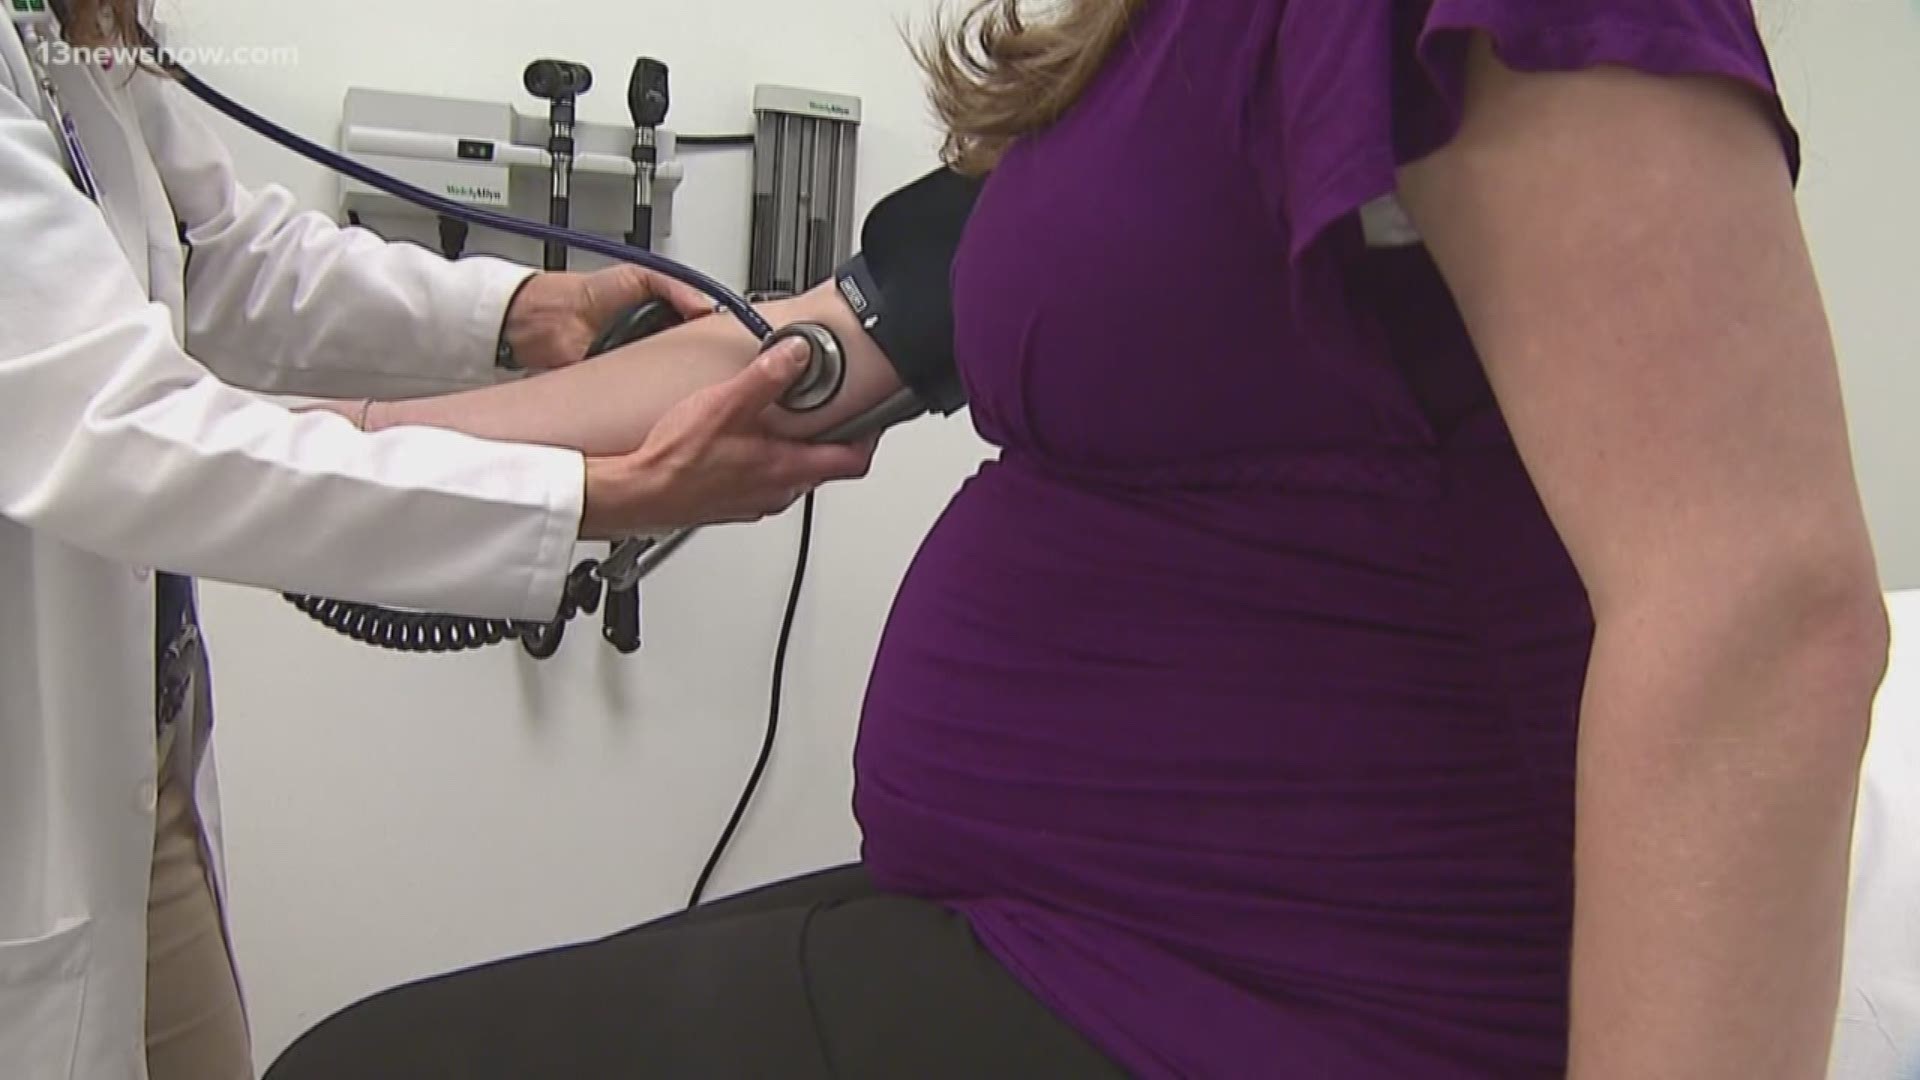 A new report from the C.D.C shows nearly half of pregnant women skipped the flu shot last year. So, this year, they're urging all of them to get their vaccine.